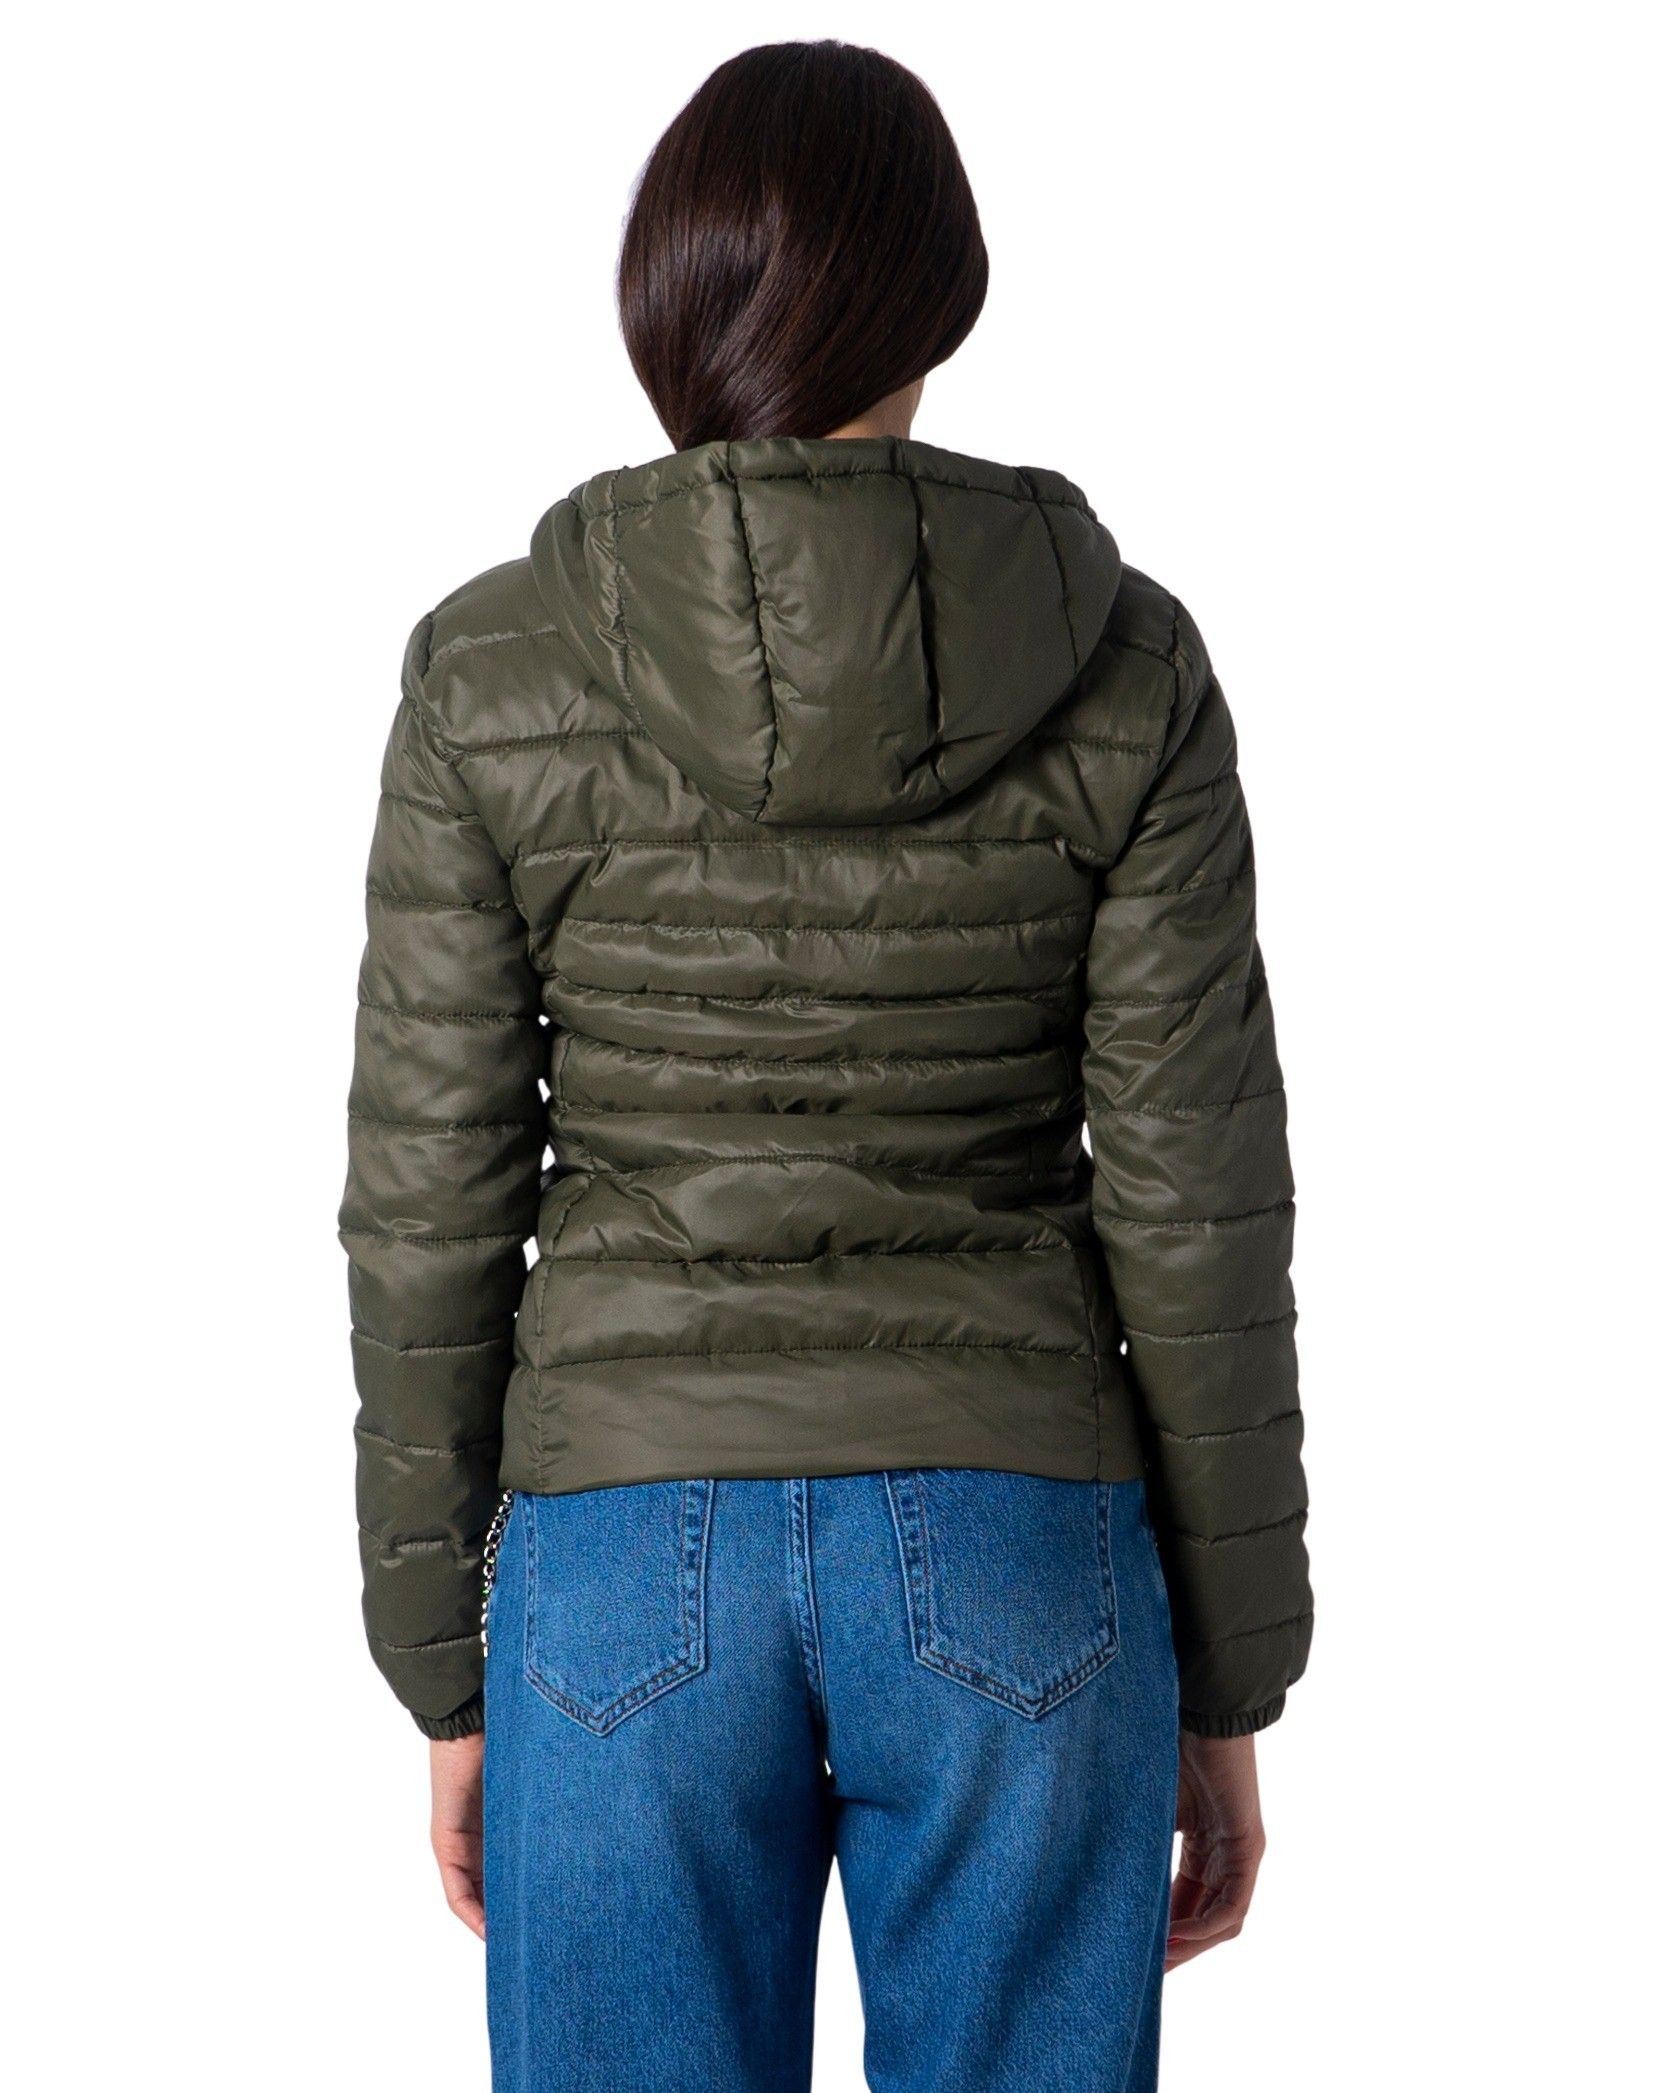 Brand: Only   Gender: Women   Type: Jackets   Color: Green   Sleeves: Long Sleeve   Collar: Hood   Fastening: With Zip   Pockets: Front Pockets   Season: Fall/winter . length:medium. style:zipper. material:nylon. type:bomber. hood:hood